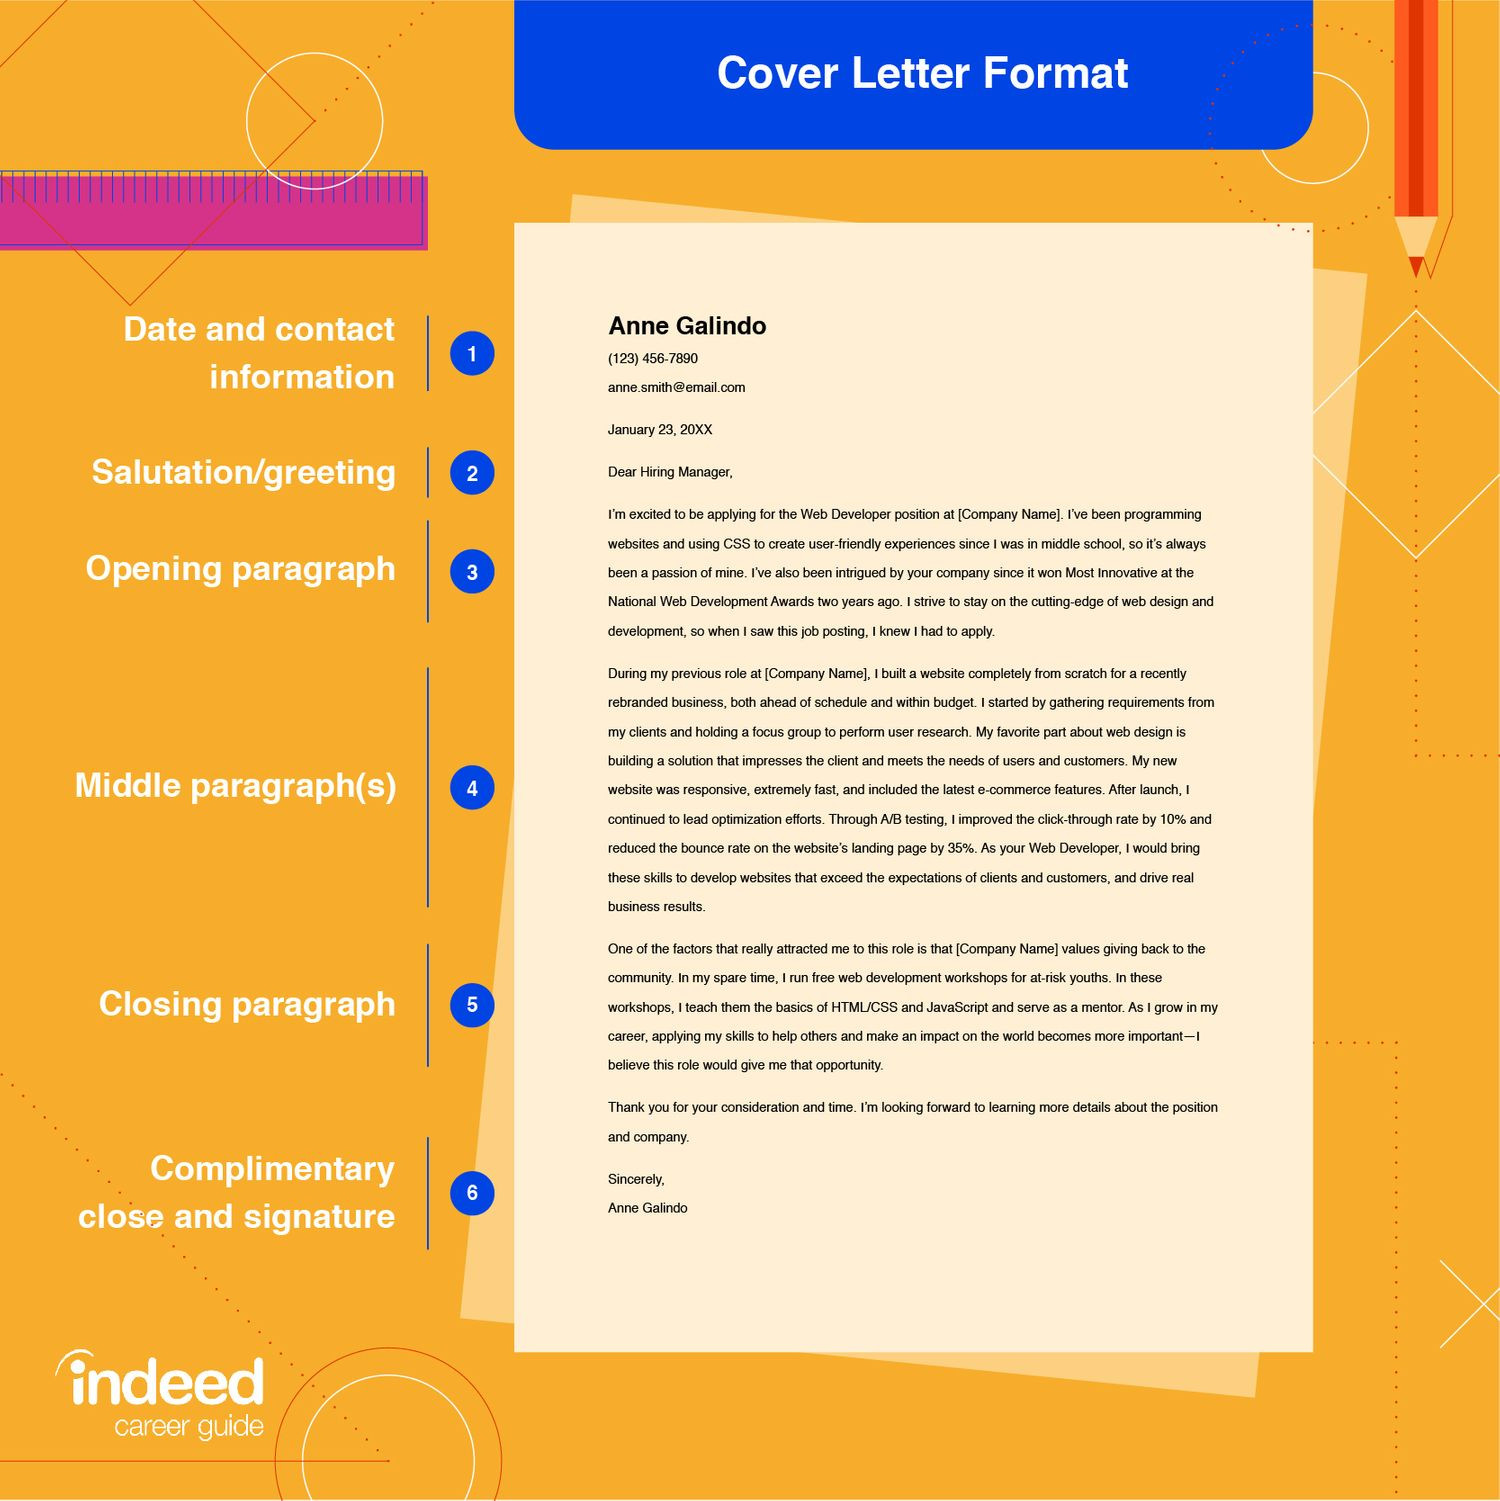 Cover Letter Sample for Resume Internship How to Write An Internship Cover Letter (with Examples) Indeed.com